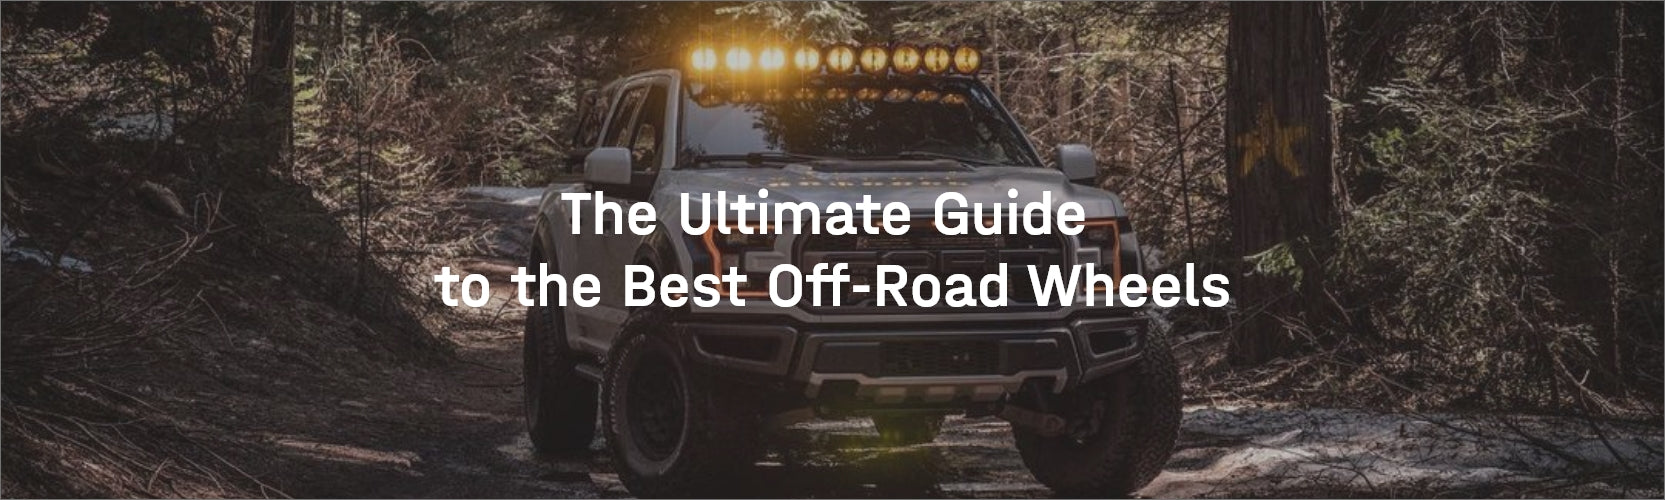 The Ultimate Guide to the Best Off-Road Wheels